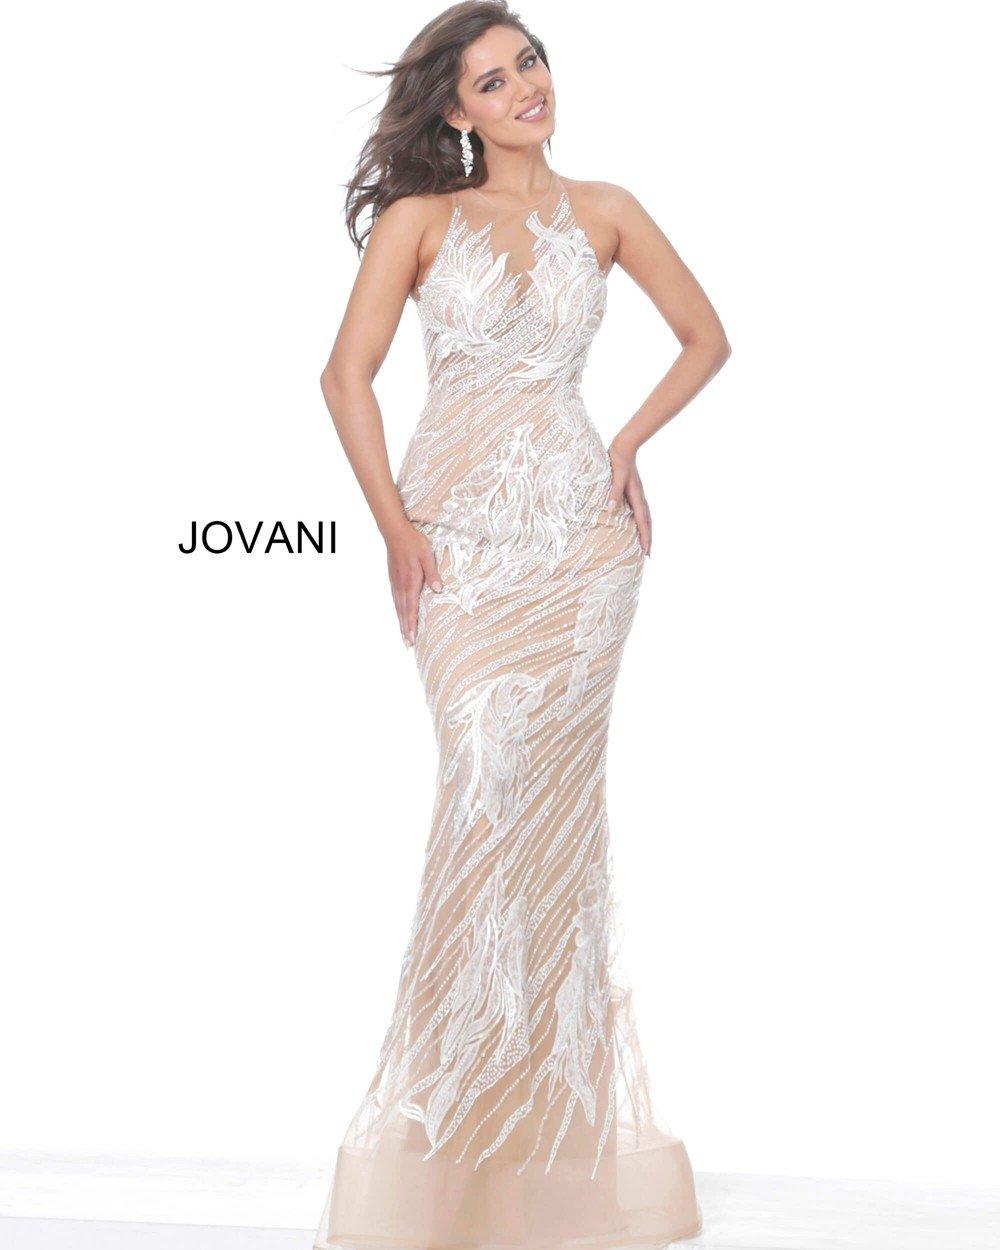 Jovani Long Fitted Prom Dress Sale 00886 - The Dress Outlet